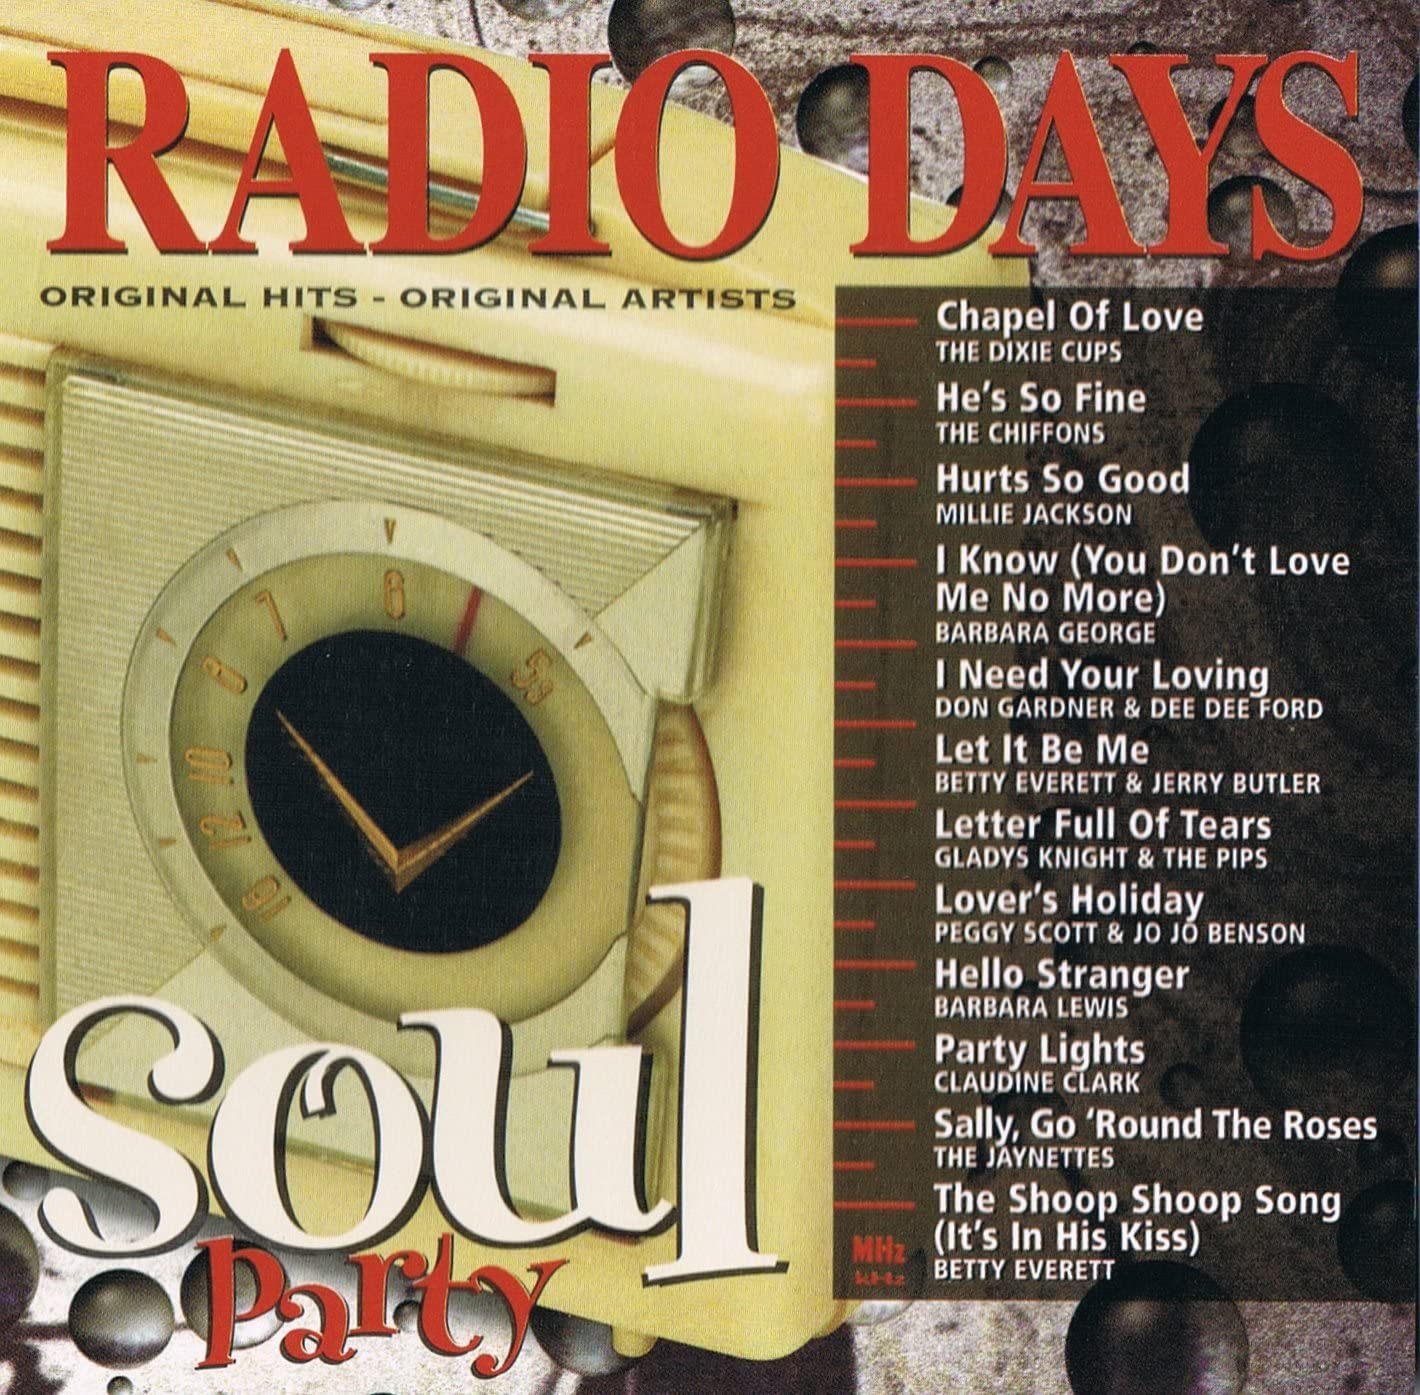 Radio Days - Soul Party (12 Original Hits) [Audio CD] Various Artists/ Dixie Cups/ Chiffons/ Millie Jackson/ Gladys Knight and the Pips